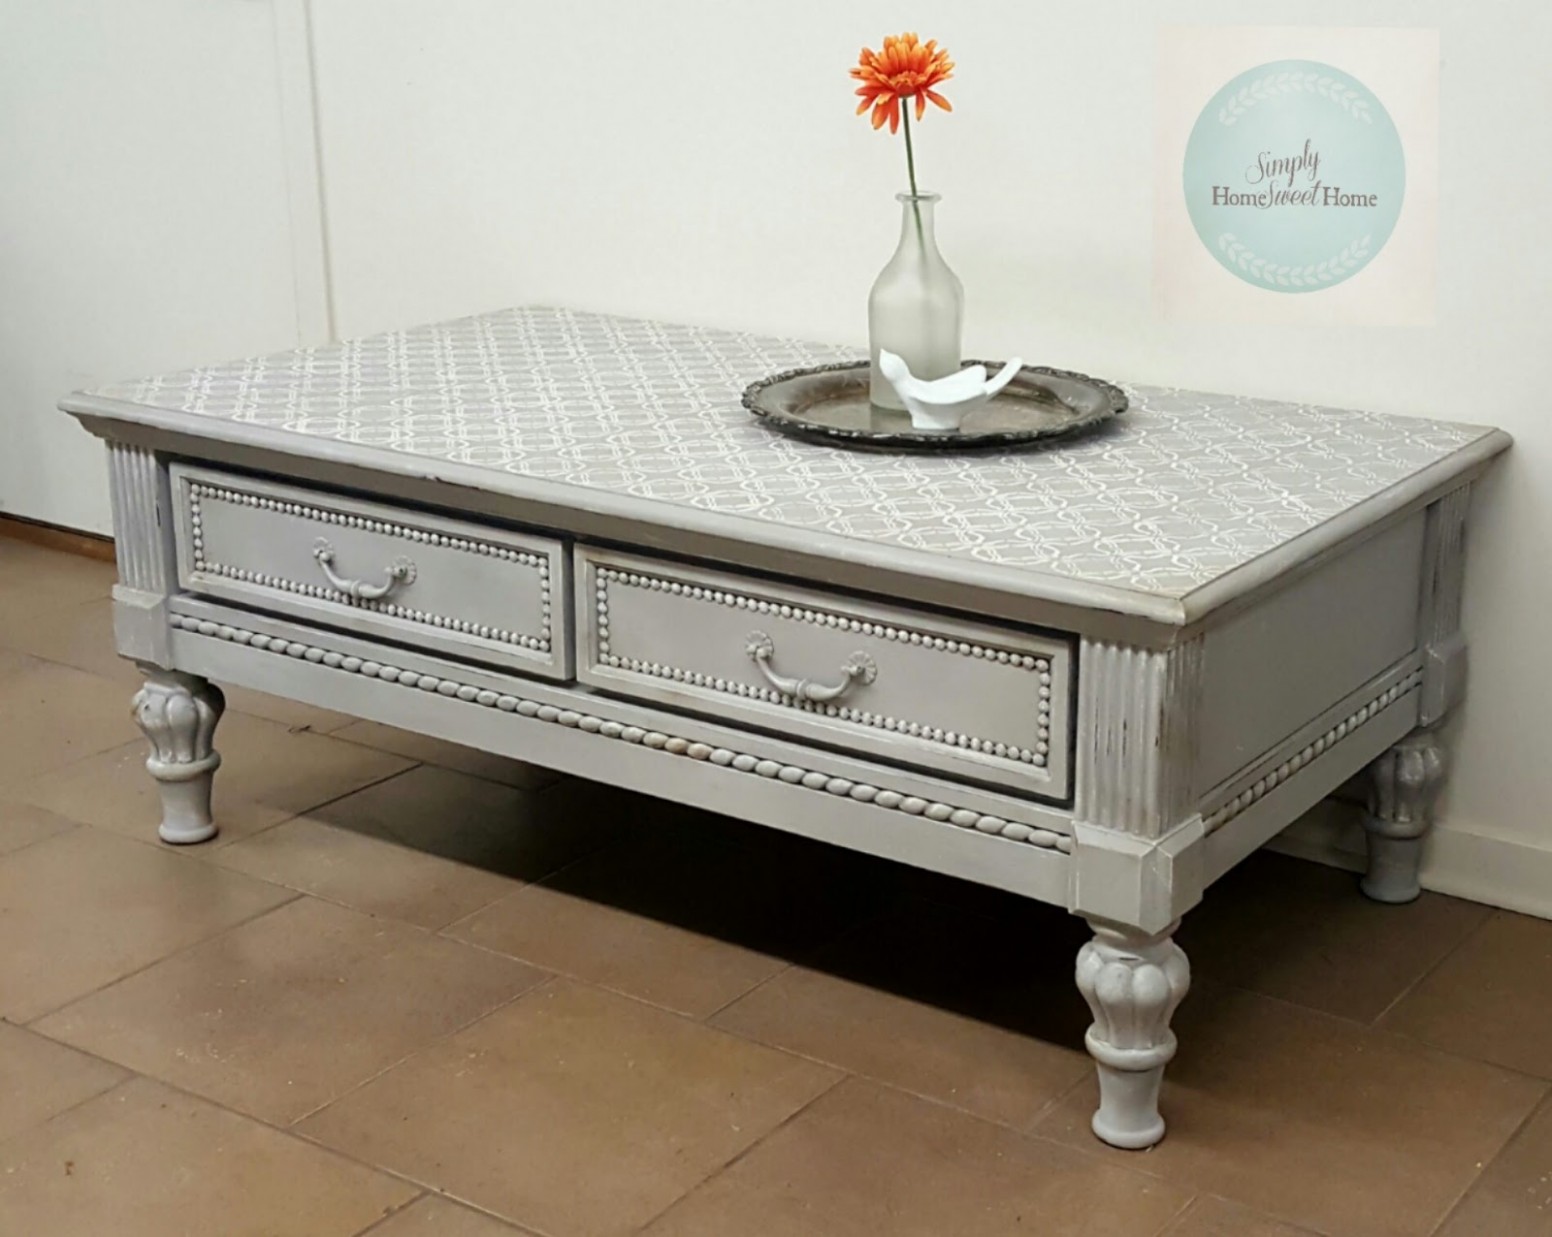 Simply Living And Loving Each Day: Coffee Table In Paris Grey Where To Buy Annie Sloan Chalk Paint In Ct